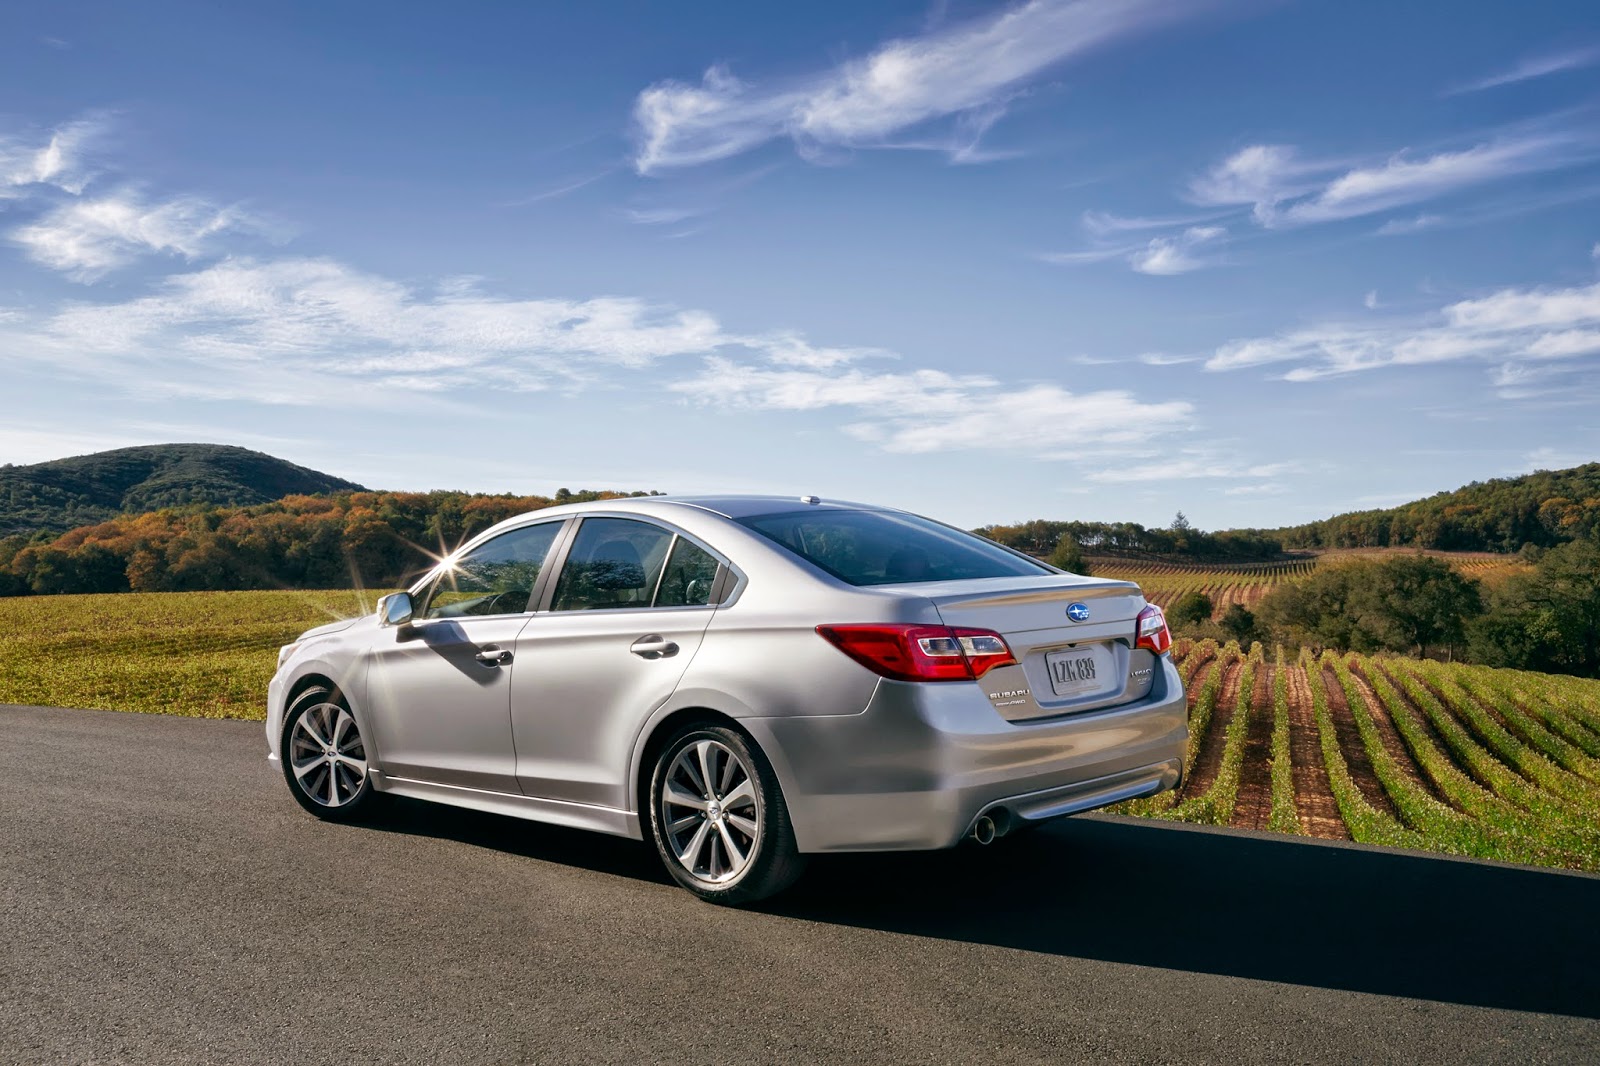 SUBARU LEGACY NAMED “BEST CAR TO BUY 2015” BY THE CAR CONNECTION